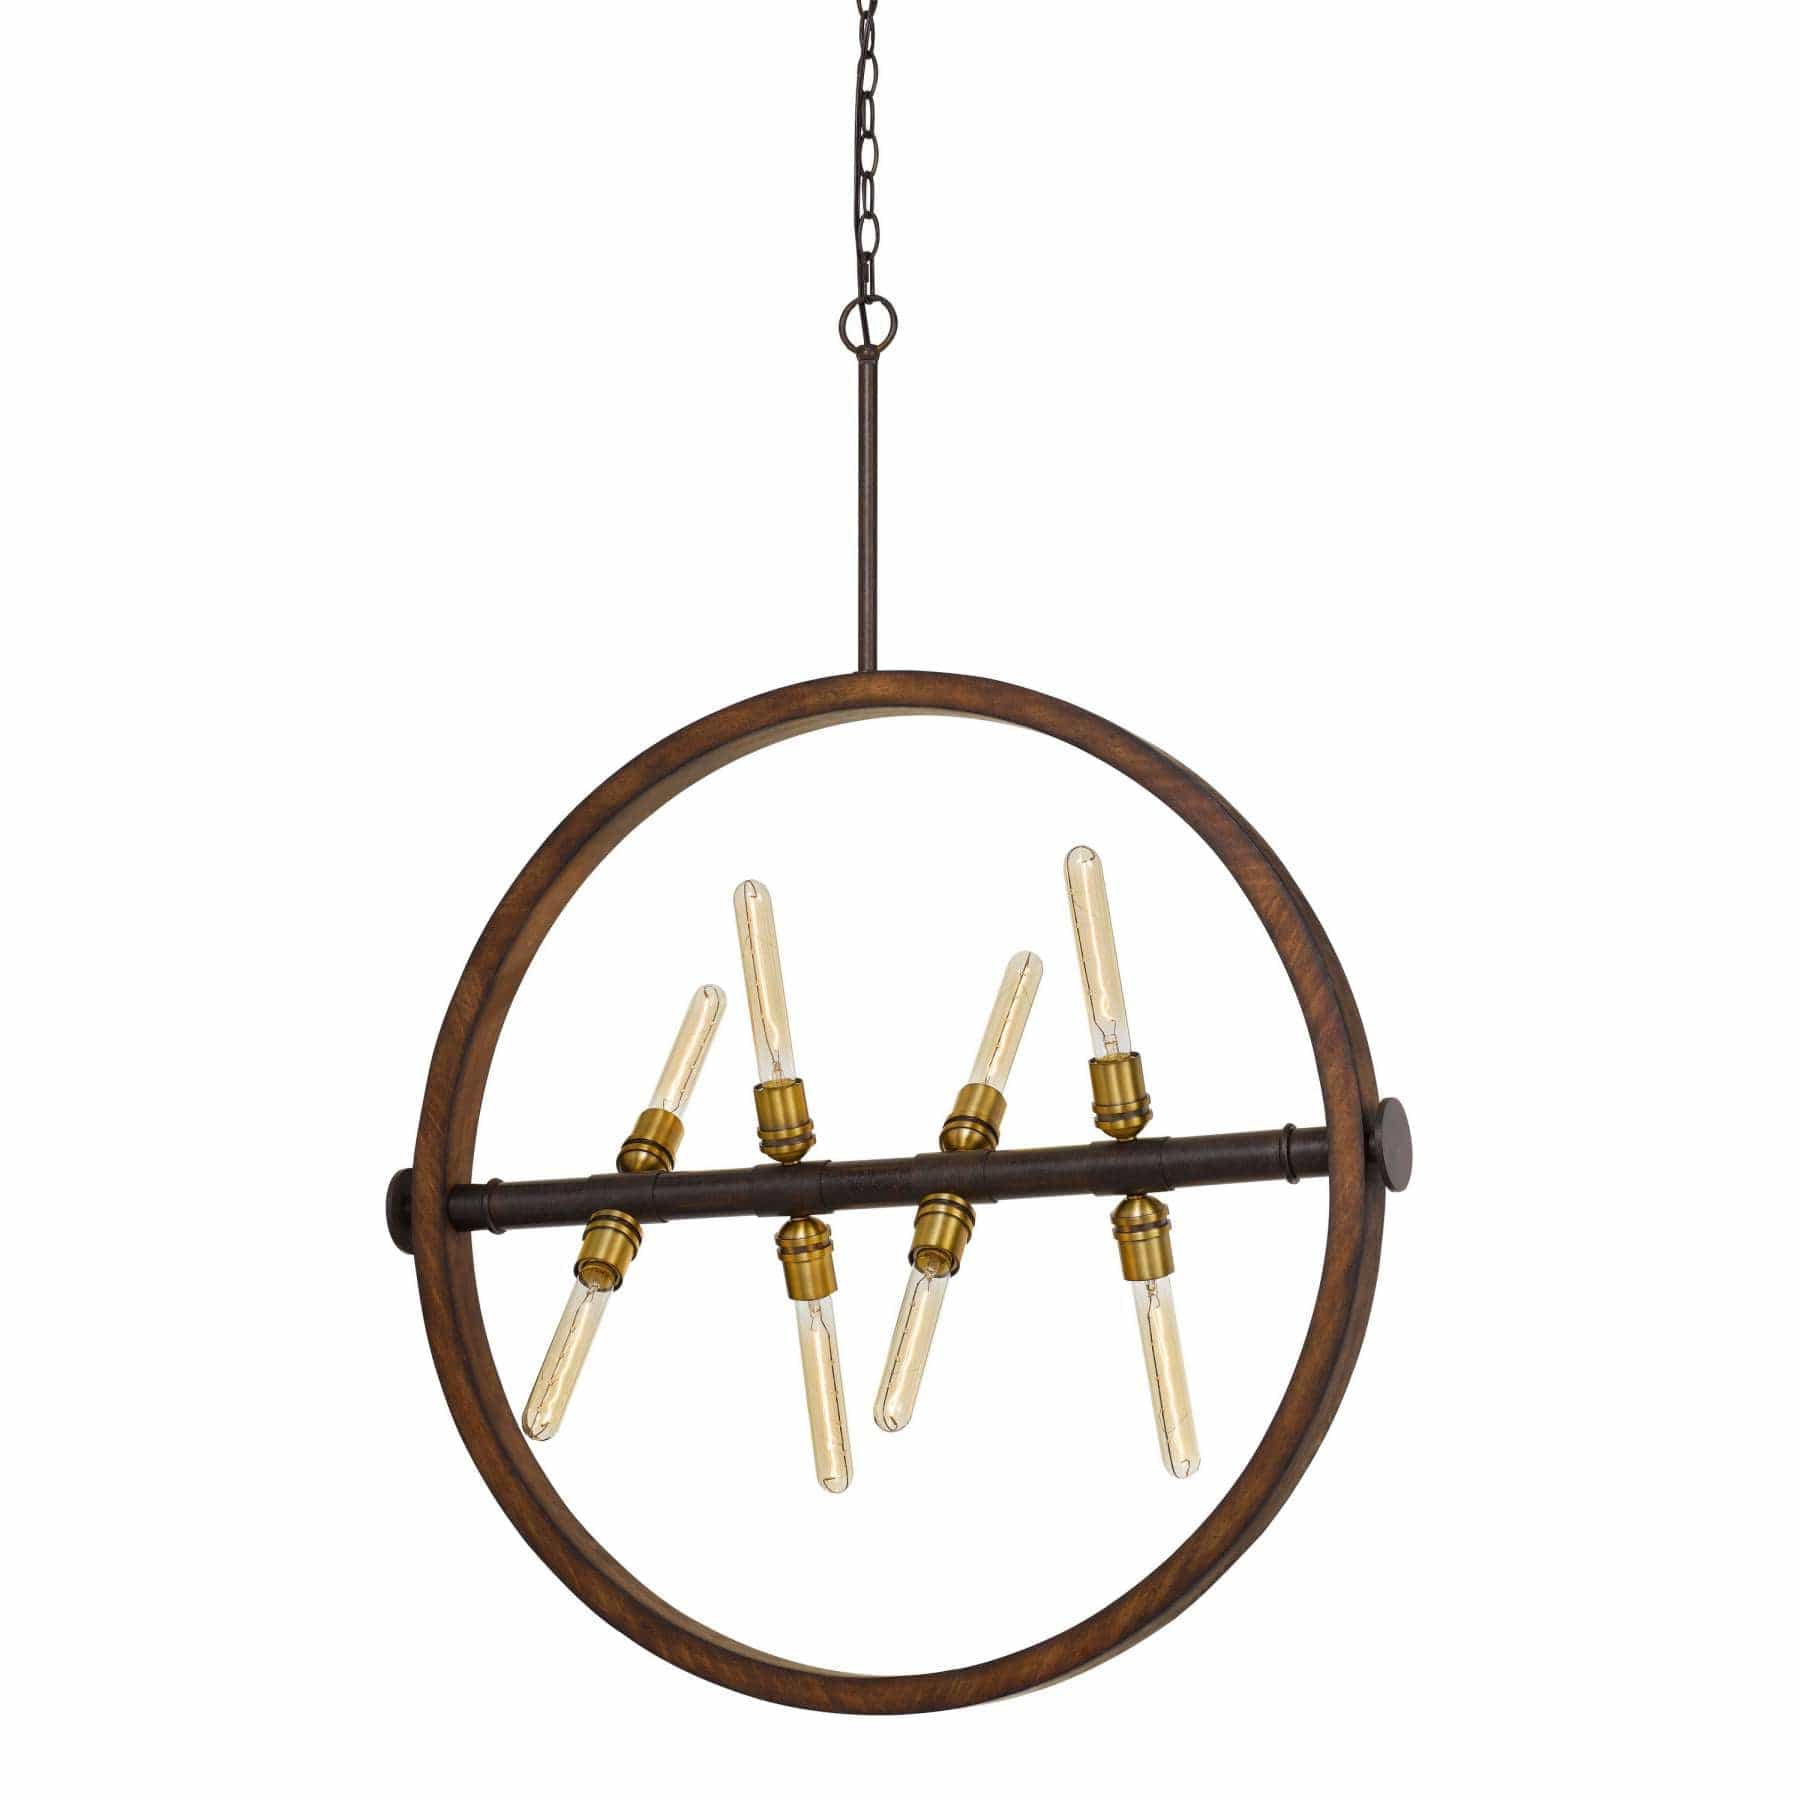 Benzara Round Wood Frame Chandelier With Metal Rod And Glass Shade,Bronze And Brown By Benzara Chandeliers BM224893